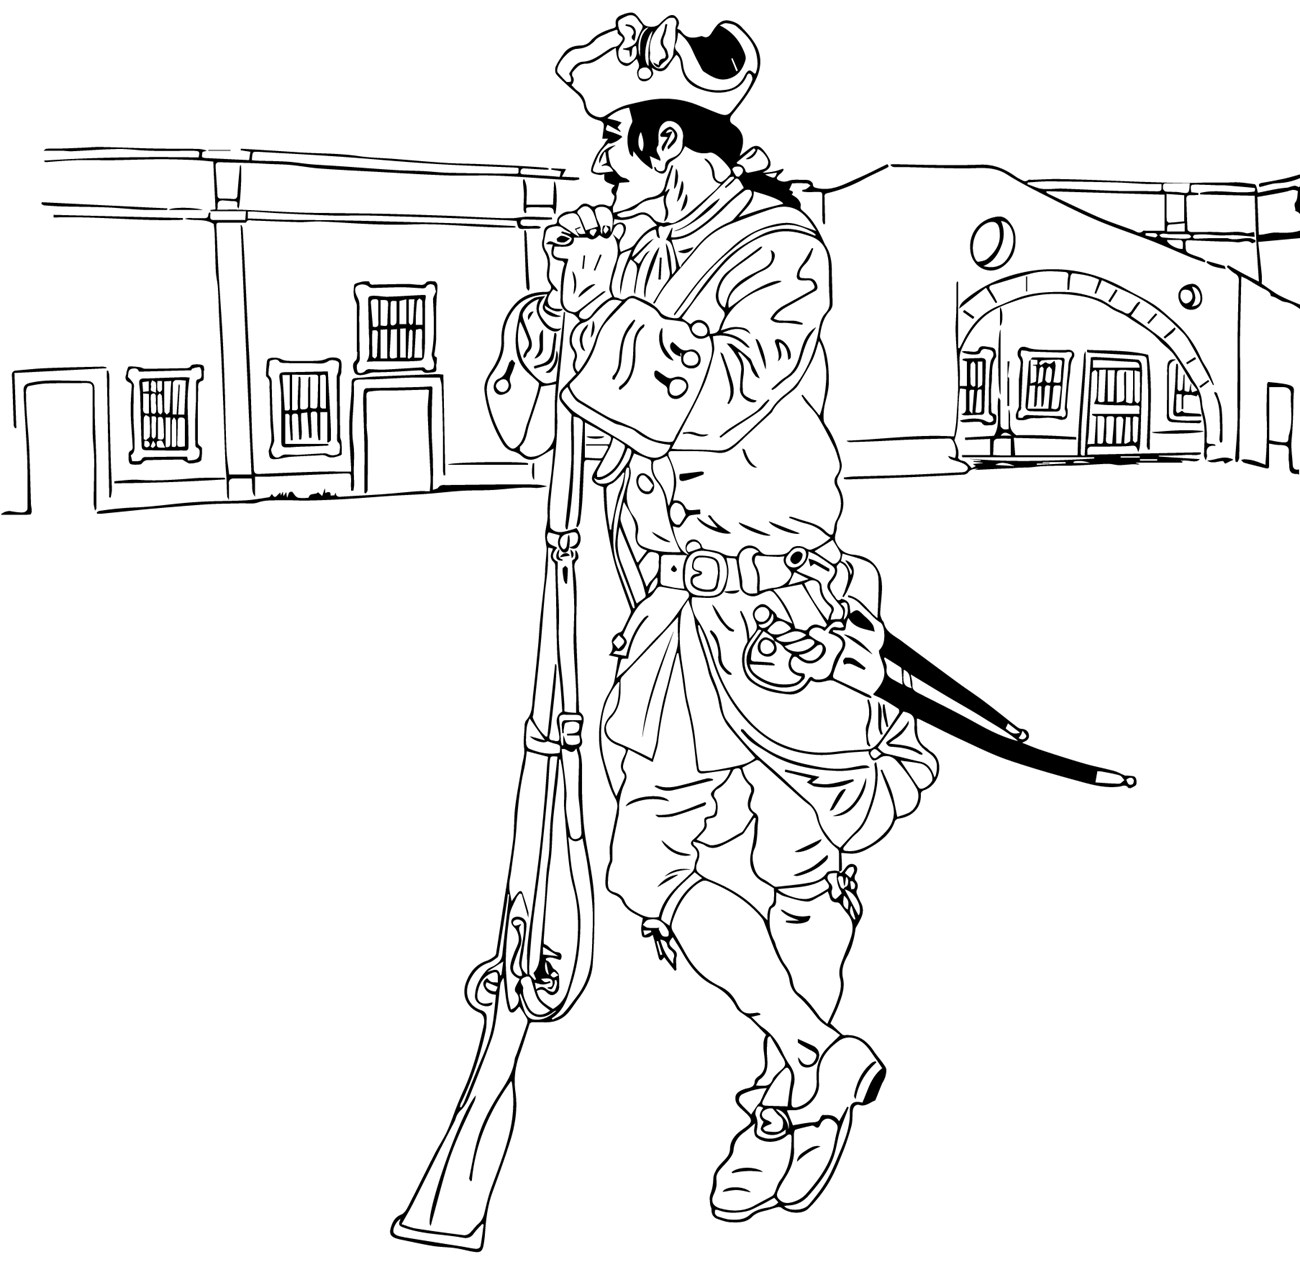 Coloring Page of Spanish Fusilier in 1750 in Castillo's courtyard.